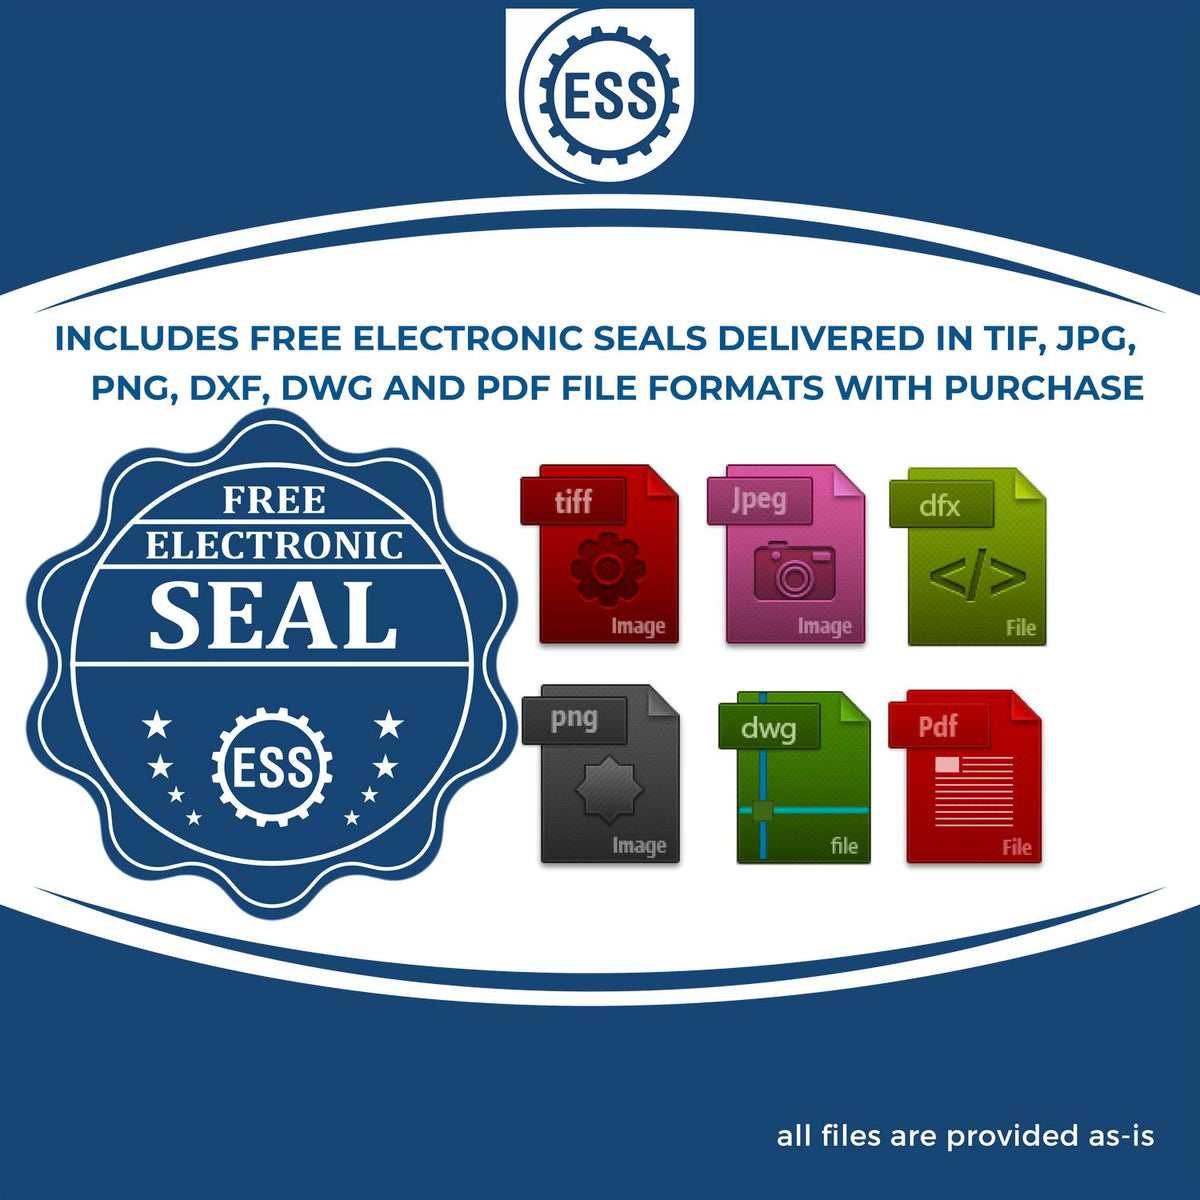 An infographic for the free electronic seal for the Hybrid District of Columbia Architect Seal illustrating the different file type icons such as DXF, DWG, TIF, JPG and PNG.